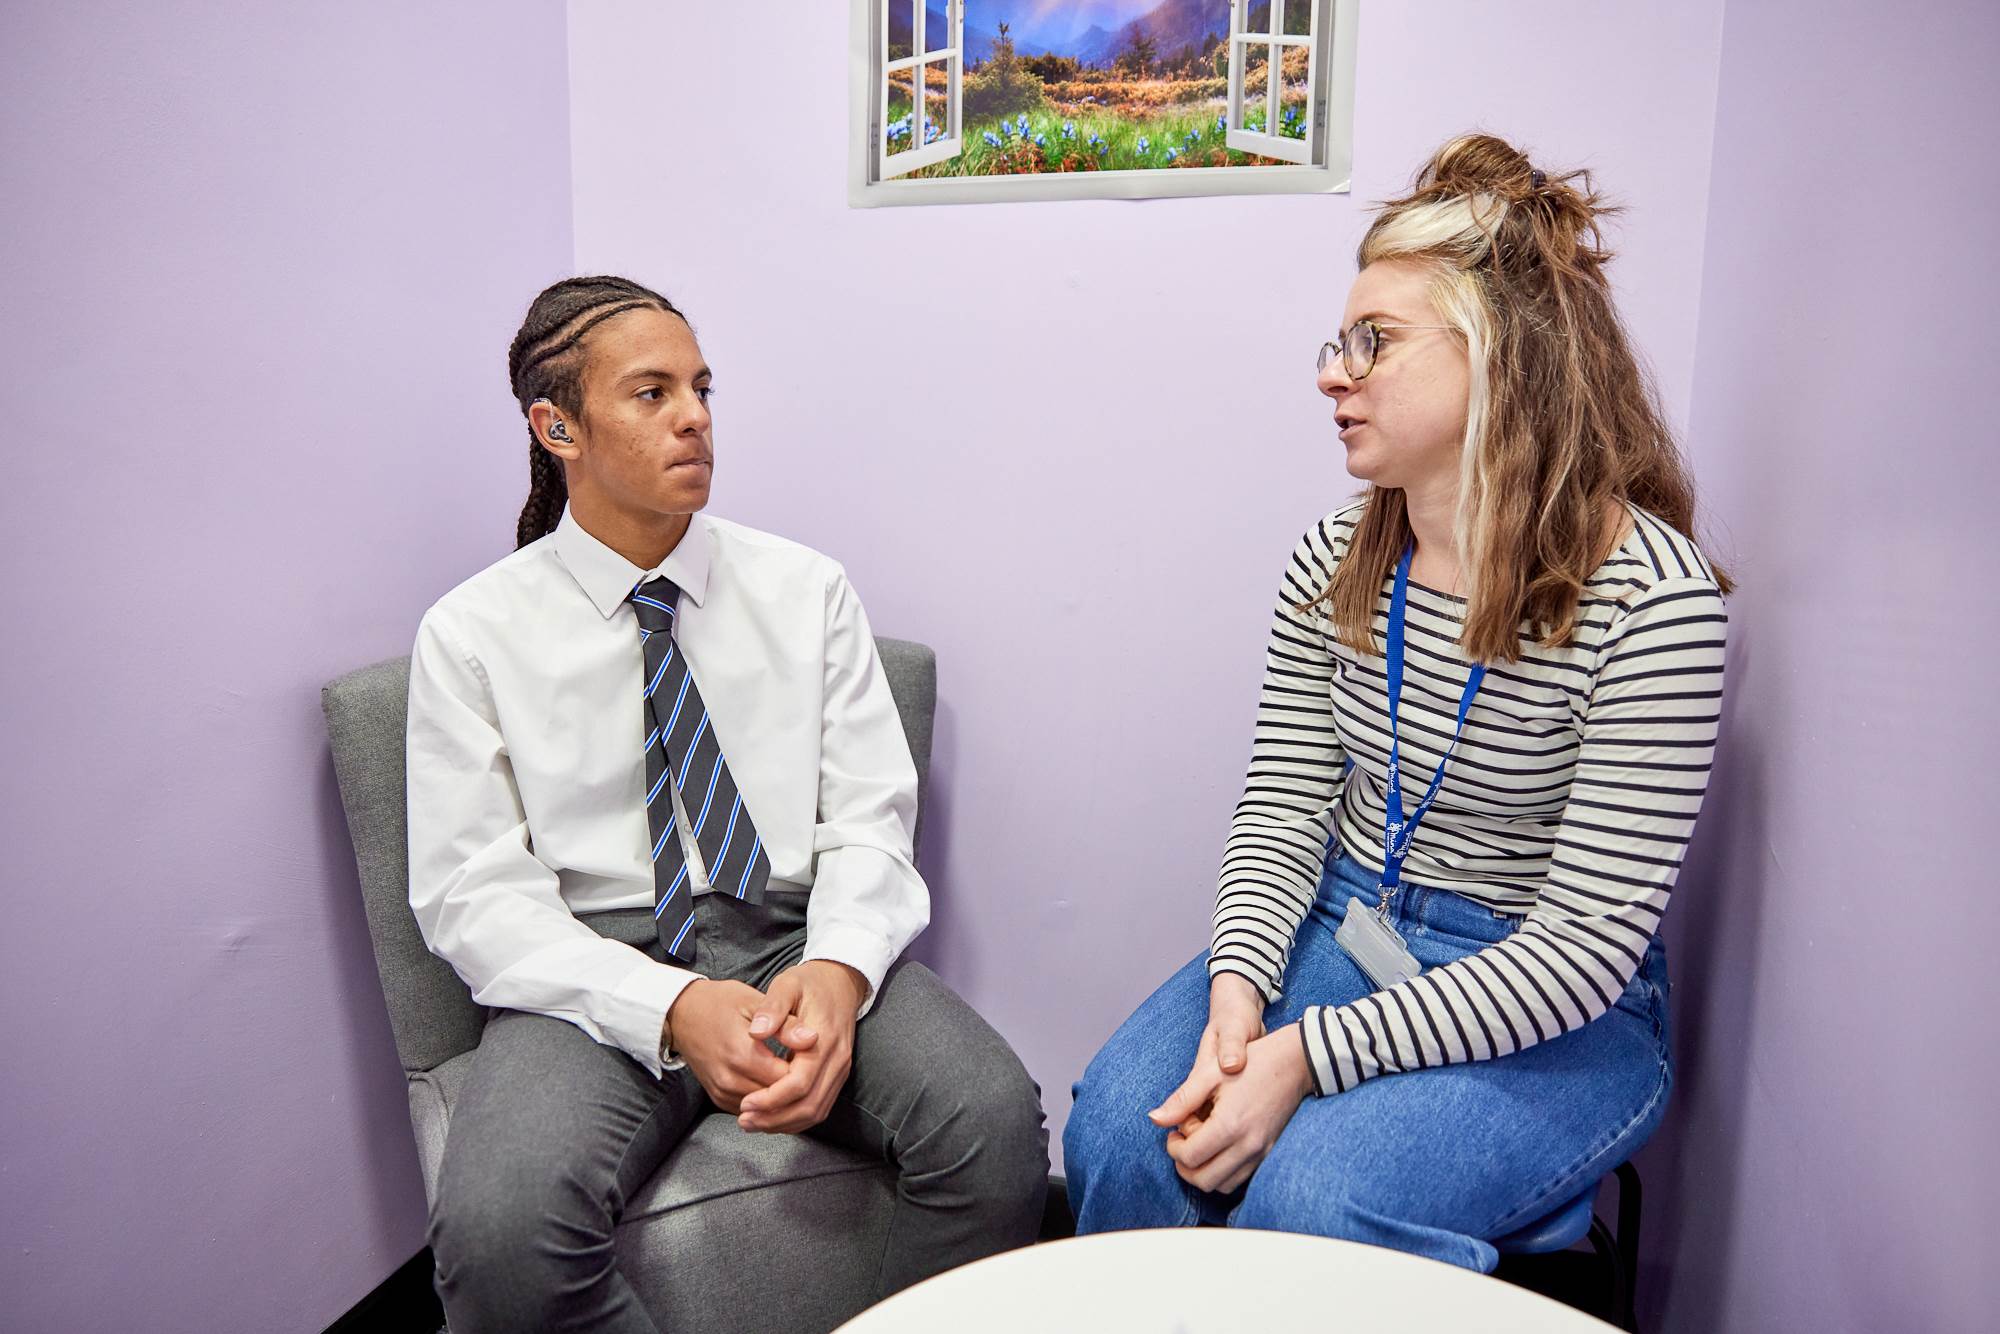 Young Person And Teacher Chatting In Room